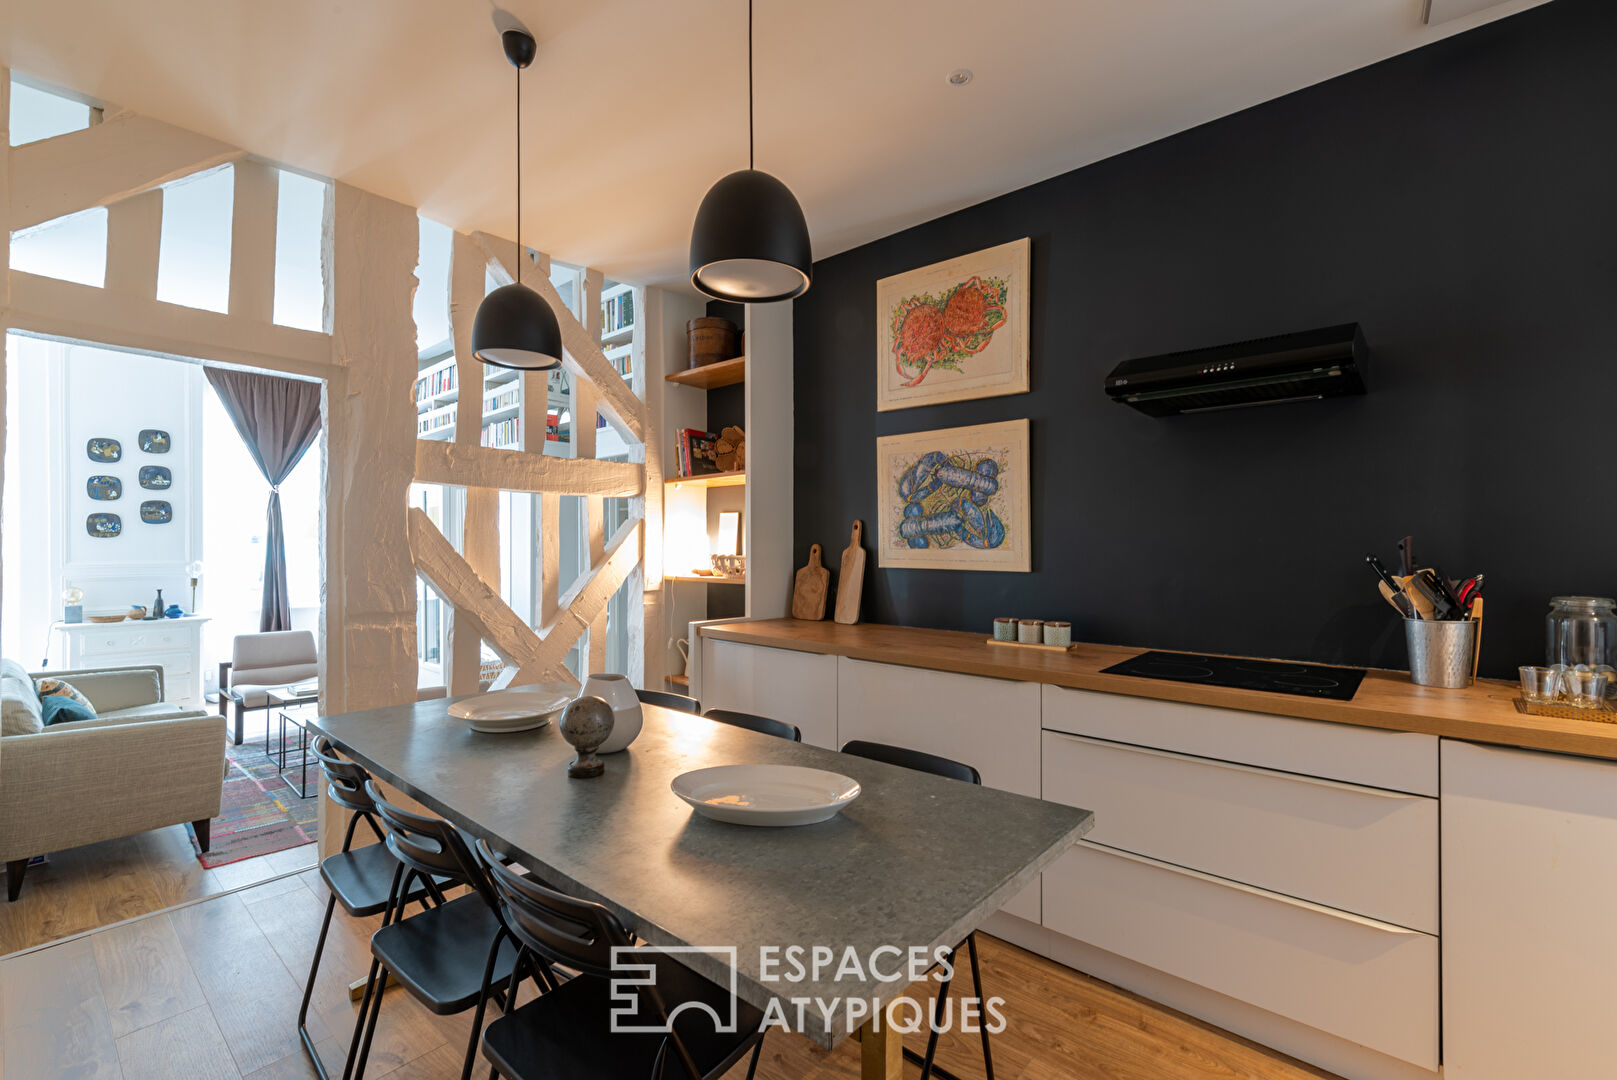 Renovated apartment in the heart of town